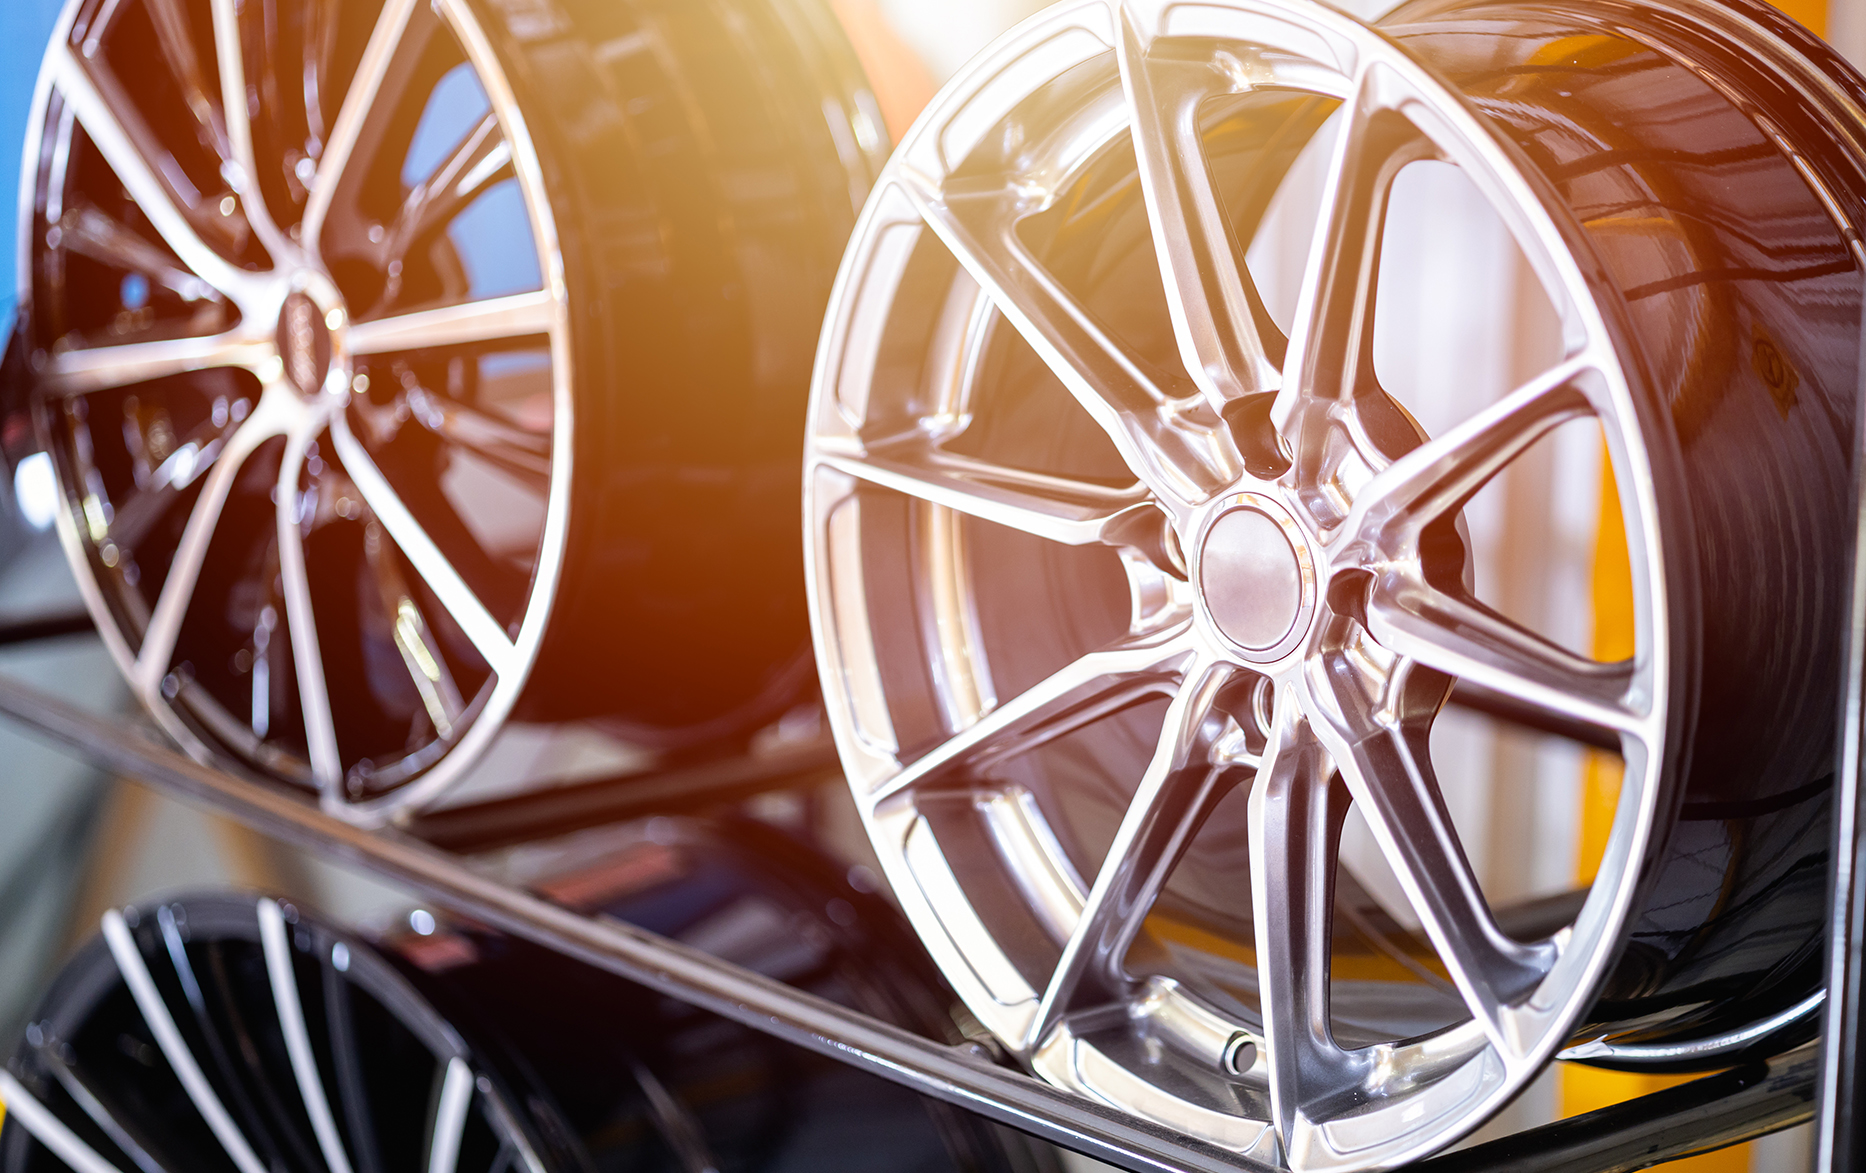 How to Clean Aluminum Wheels and Rims